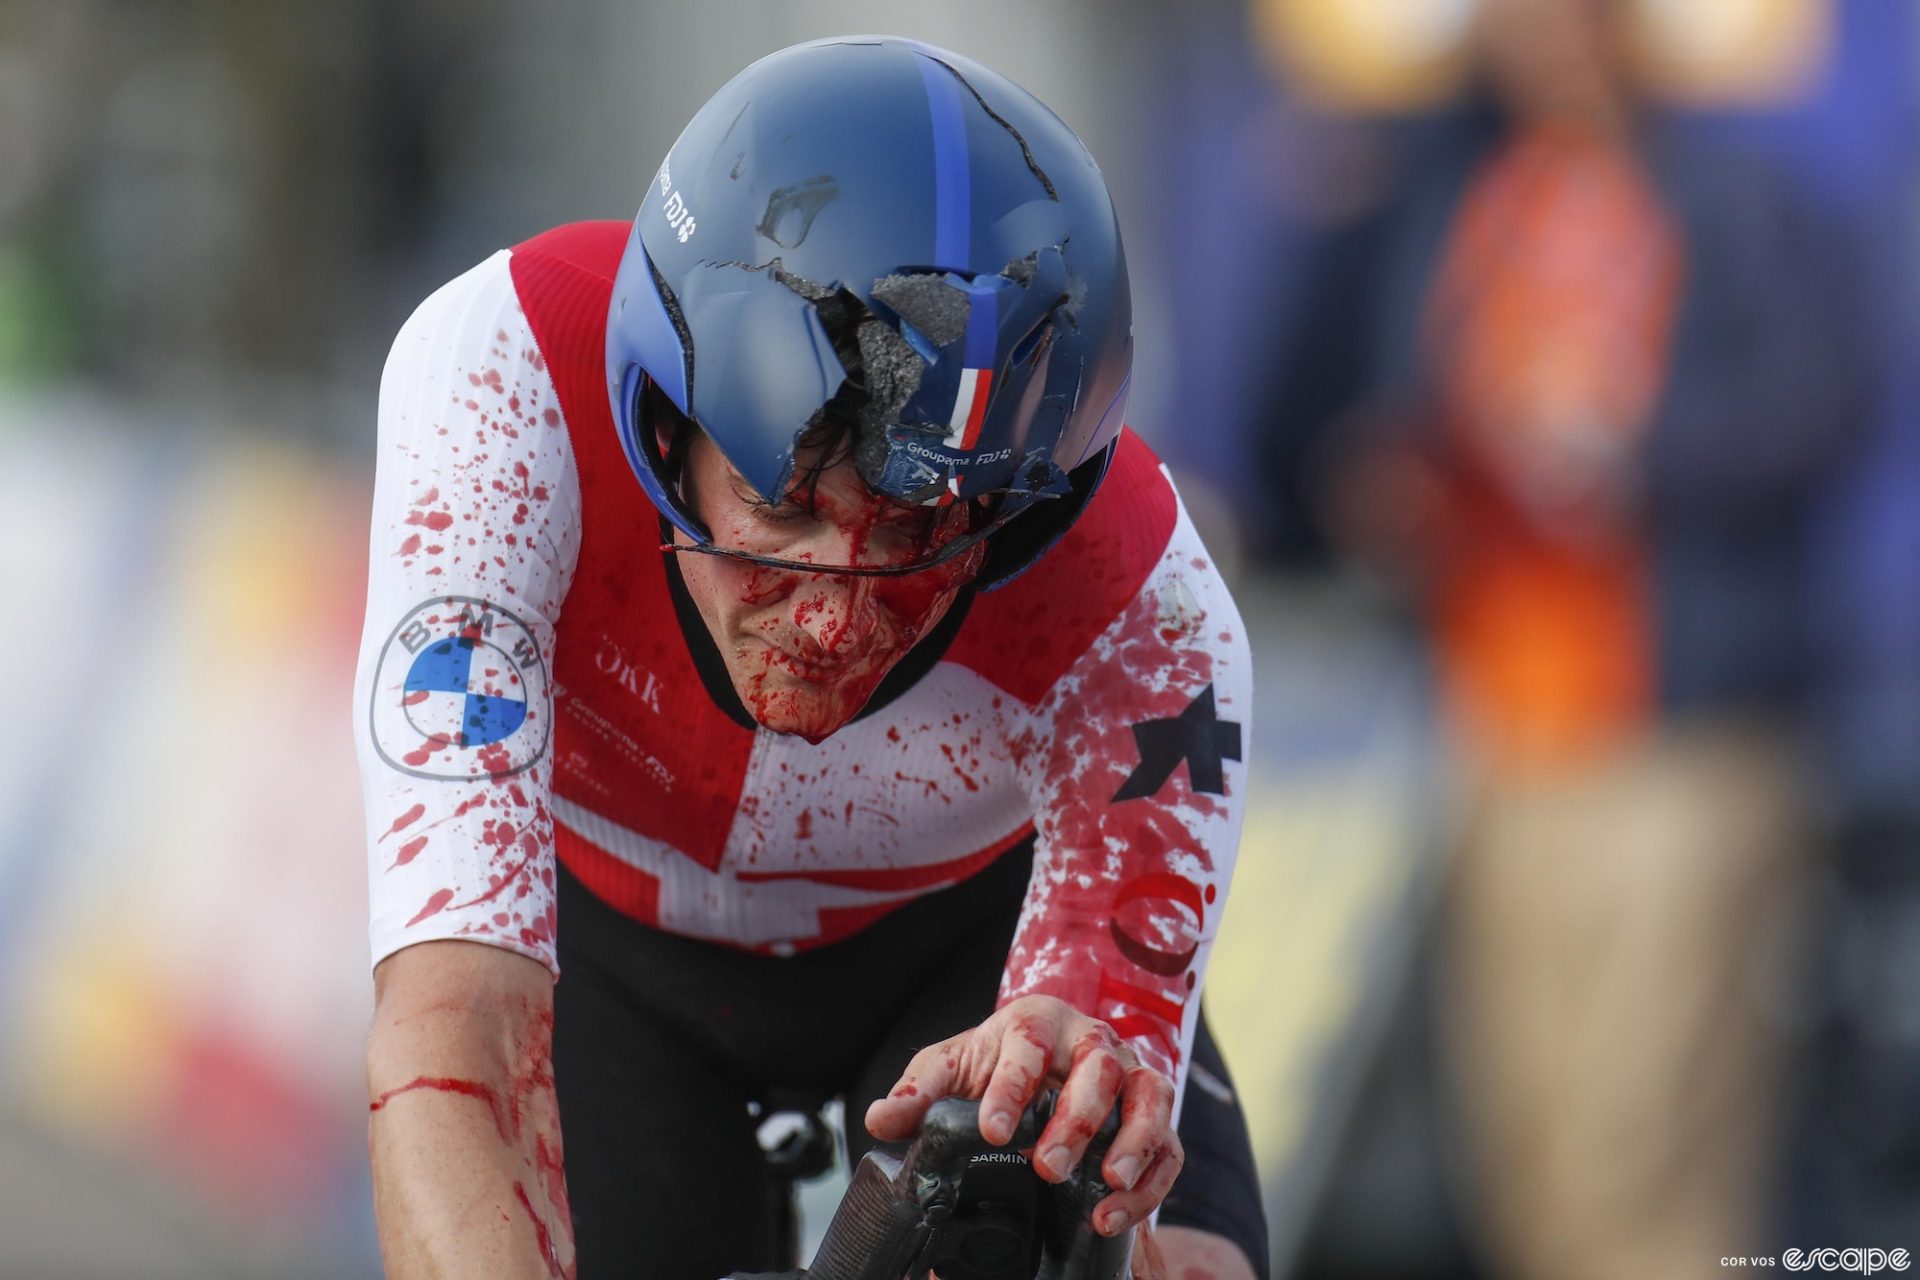 Stefan Küng finishes the TT at Euros covered in blood.